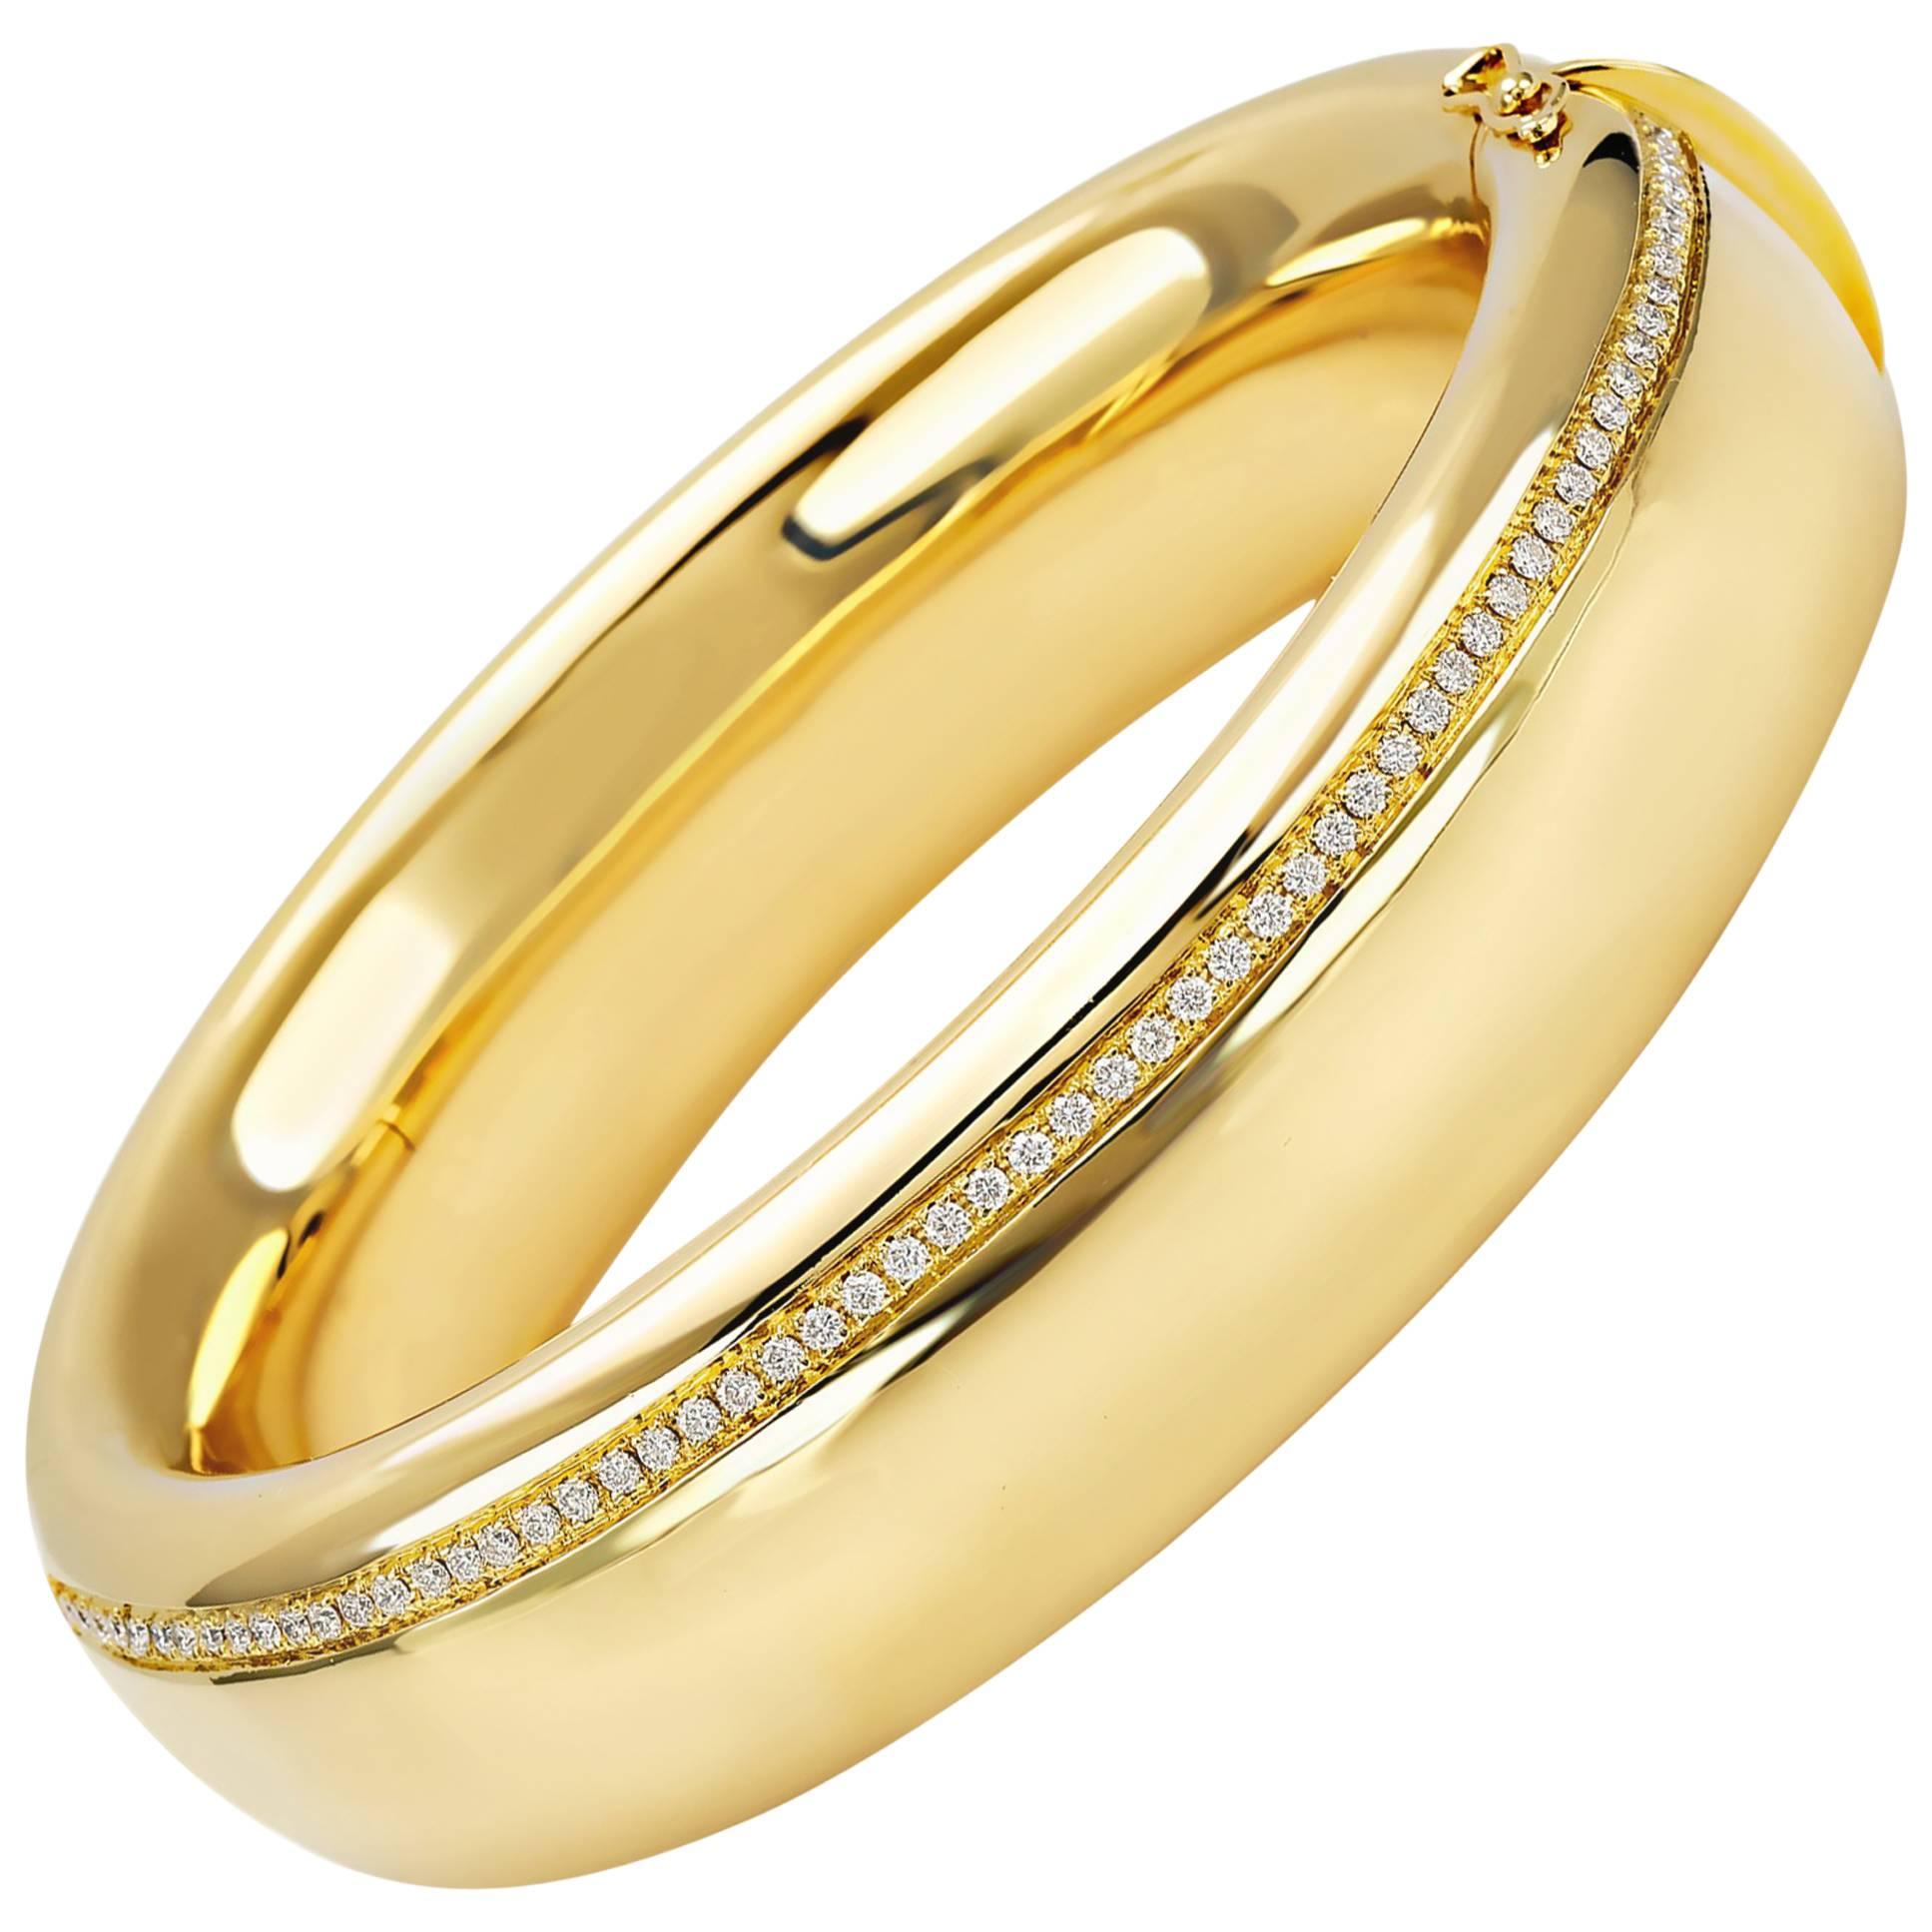 Bangle from the "Essence"  Collection  18 Karat Yellow Gold and Diamonds